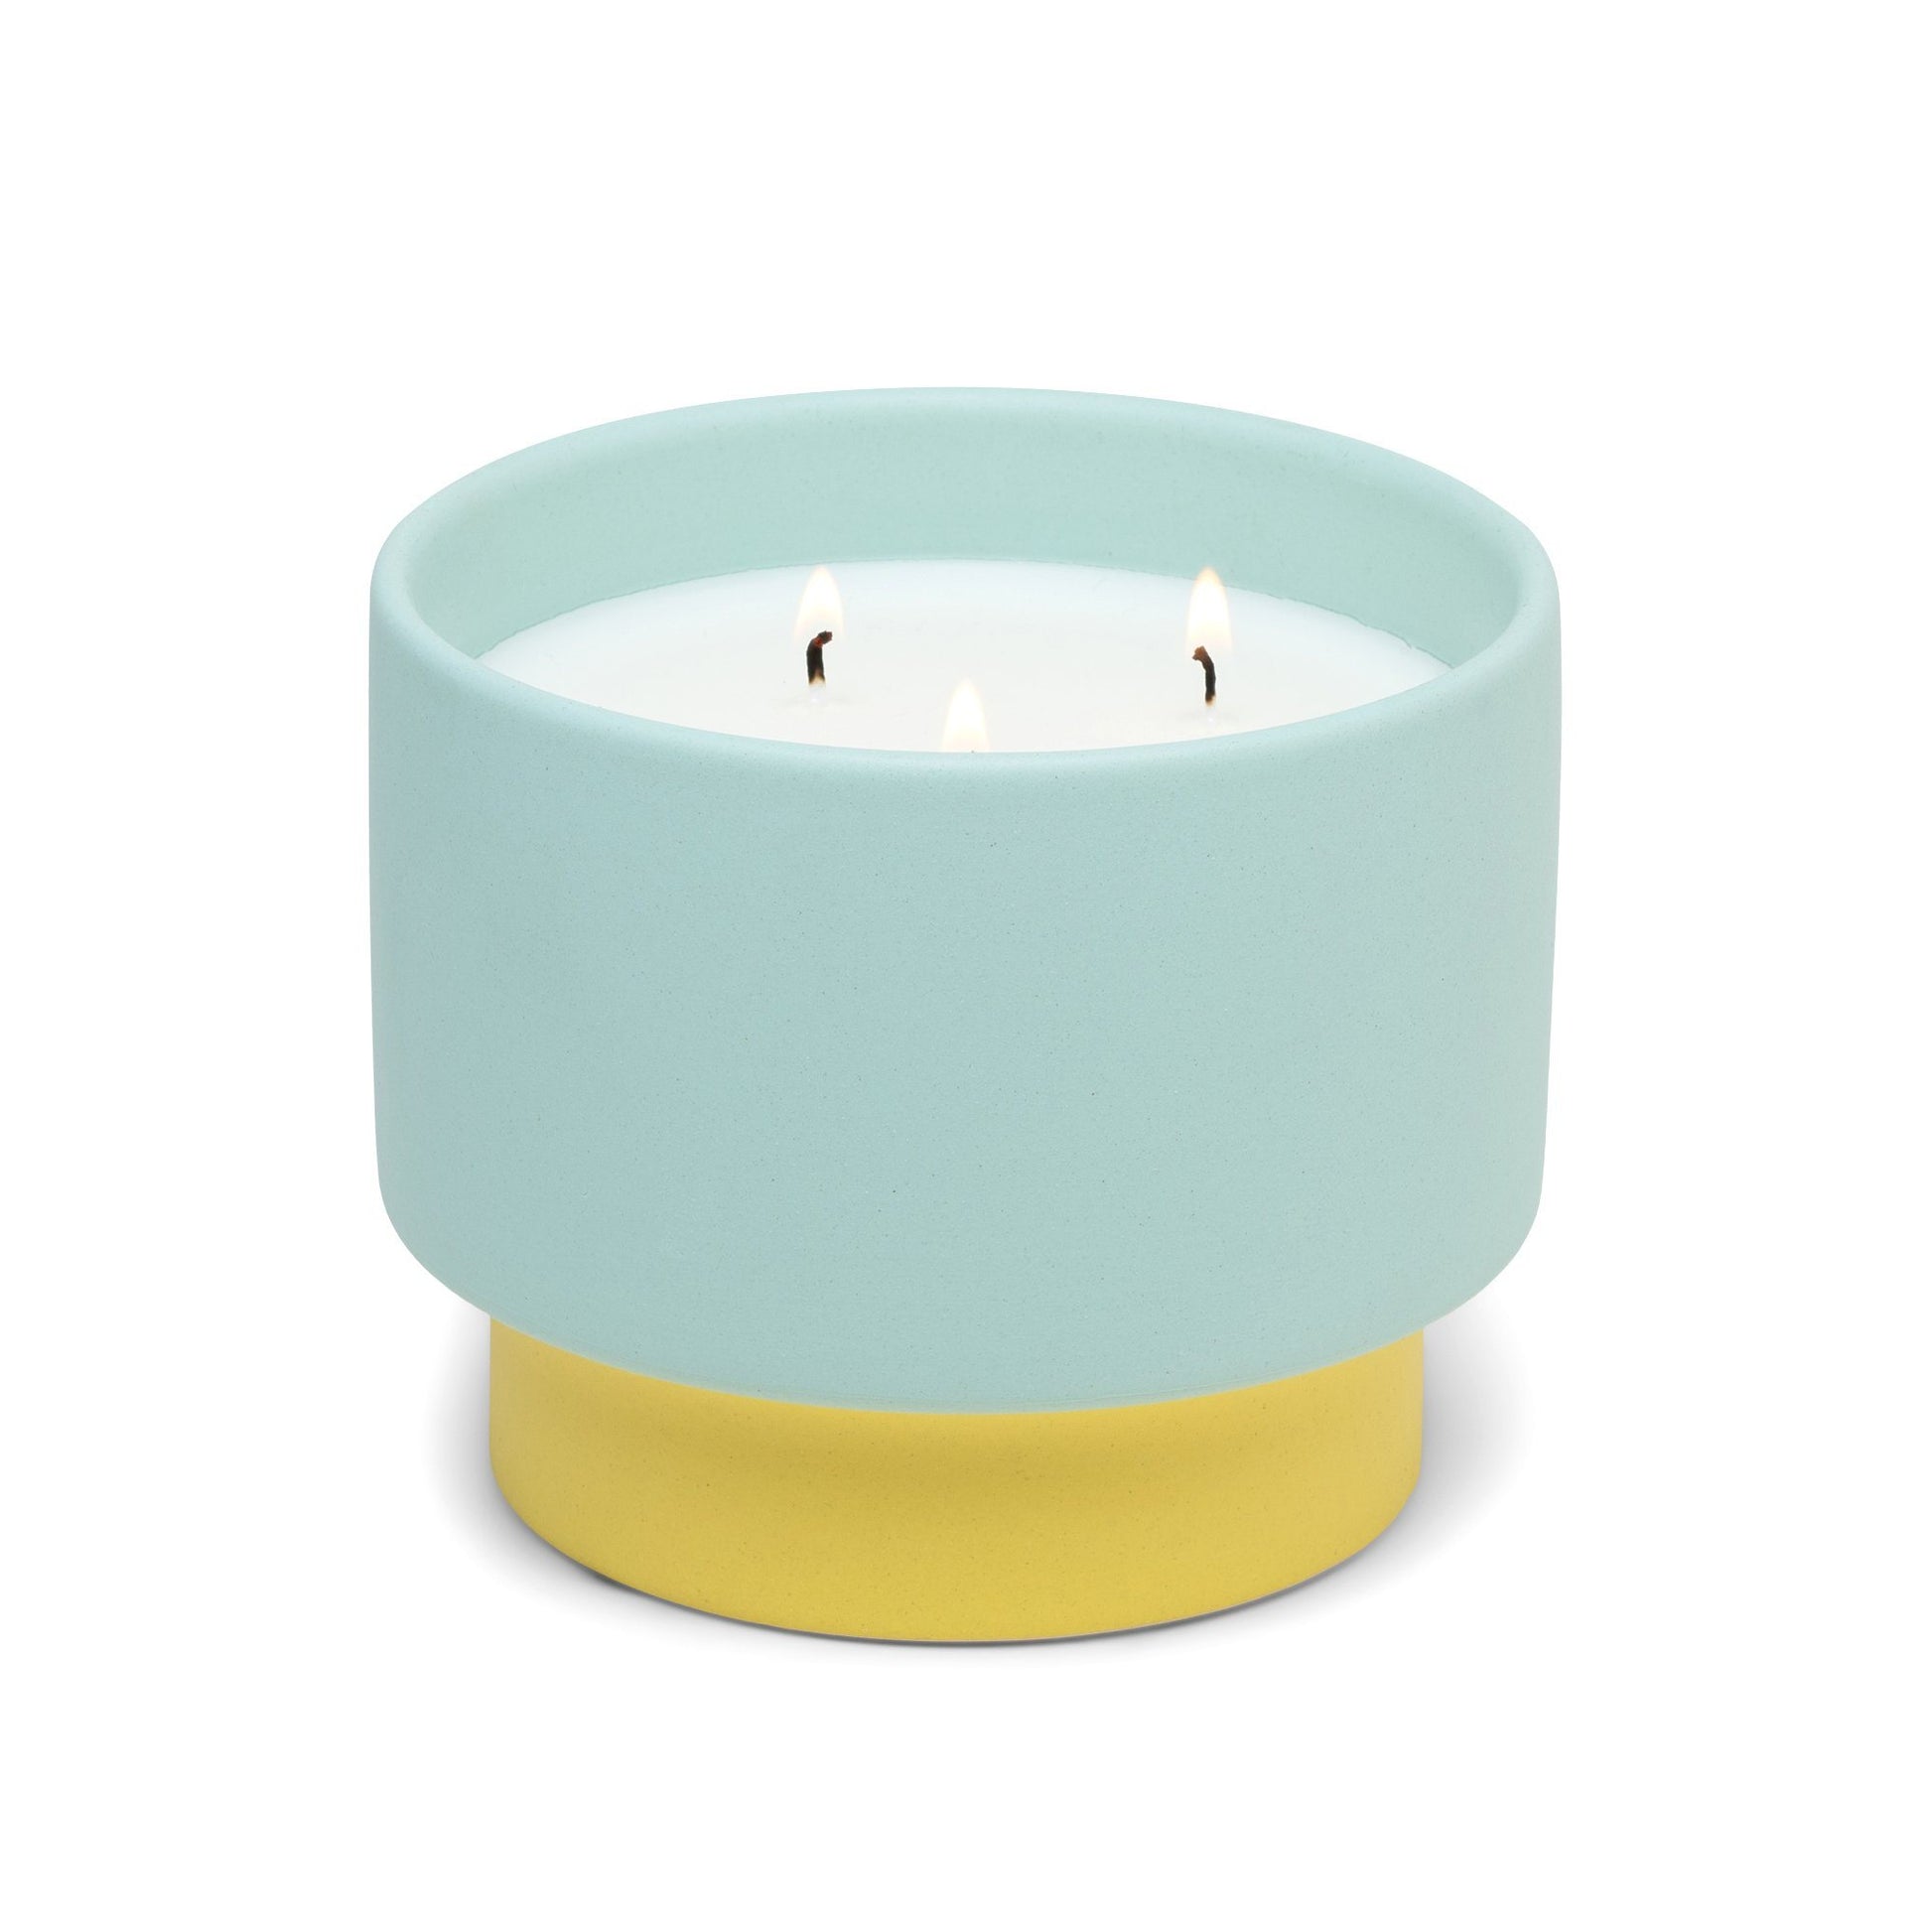 16 oz ceramic vessel from the Color Block collection; turquoise upper section and yellow lower section; white wax and three cotton wicks